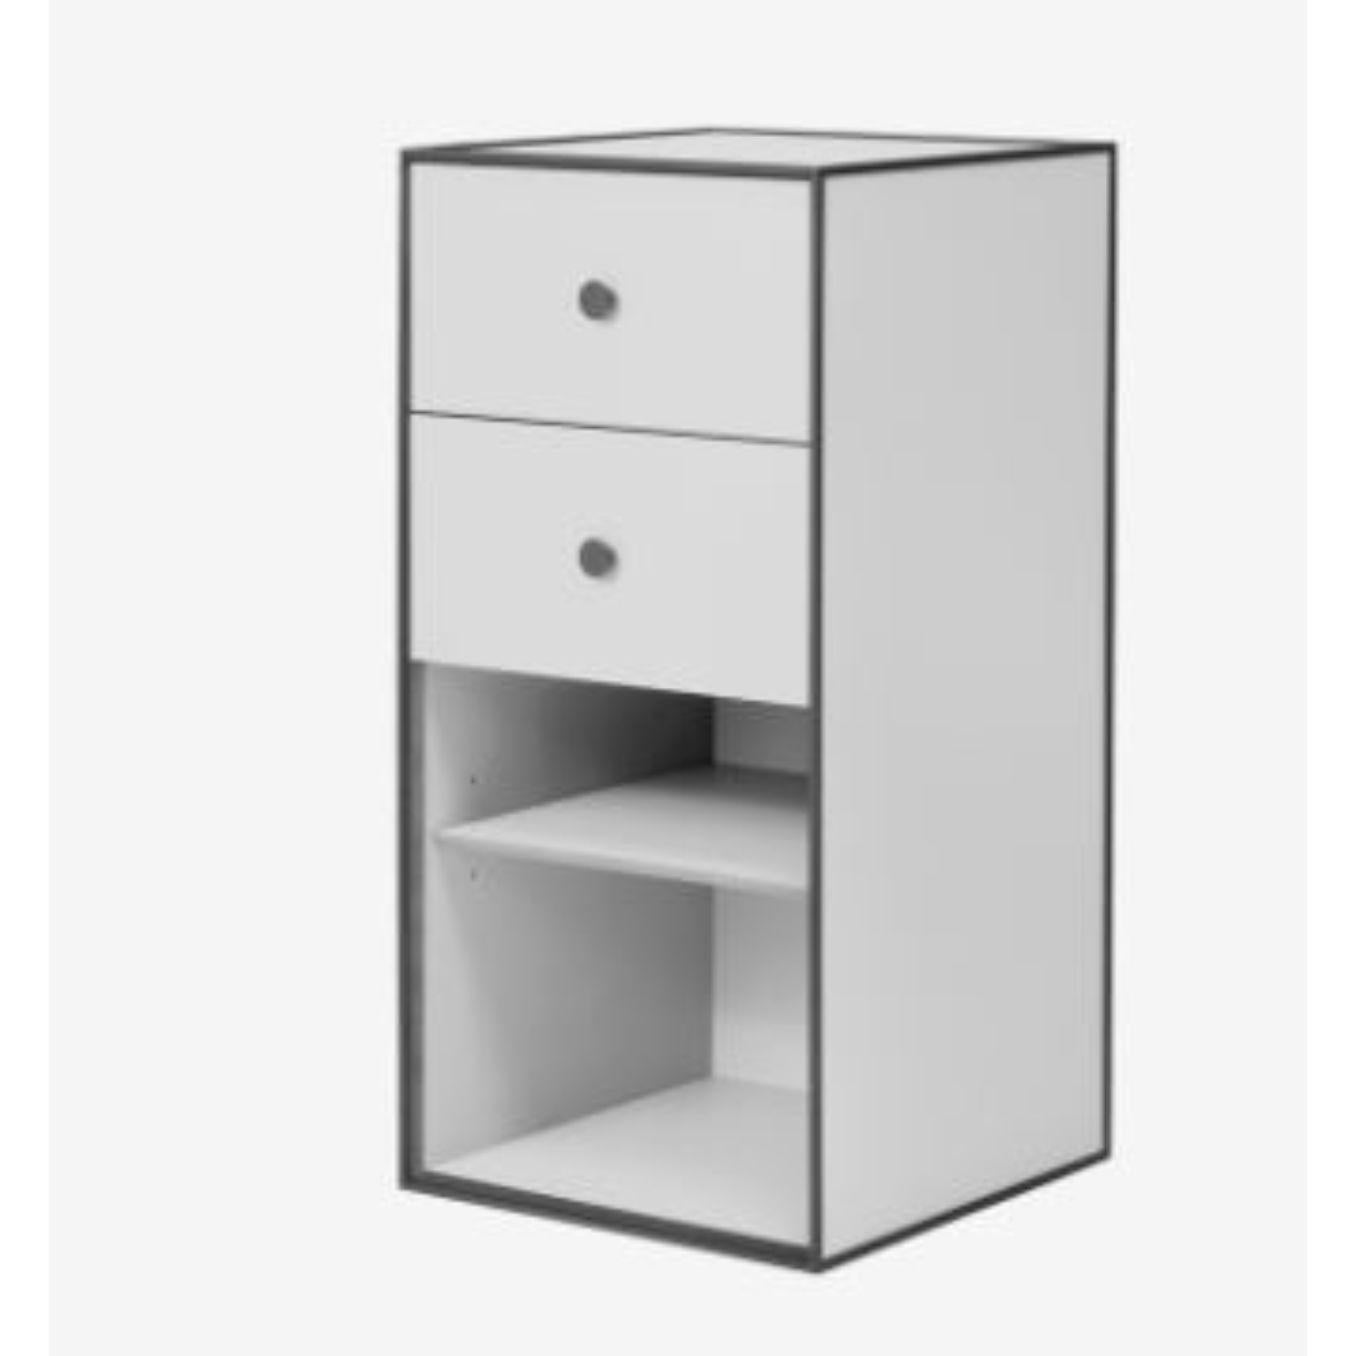 70 light grey frame box with shelf / 2 drawers by Lassen.
Dimensions: D 35 x W 35 x H 70 cm. 
Materials: Finér, Melamin, Melamin, Melamine, Metal, Veneer.
Also available in different colours and dimensions. 
Weight: 13 Kg


By Lassen is a